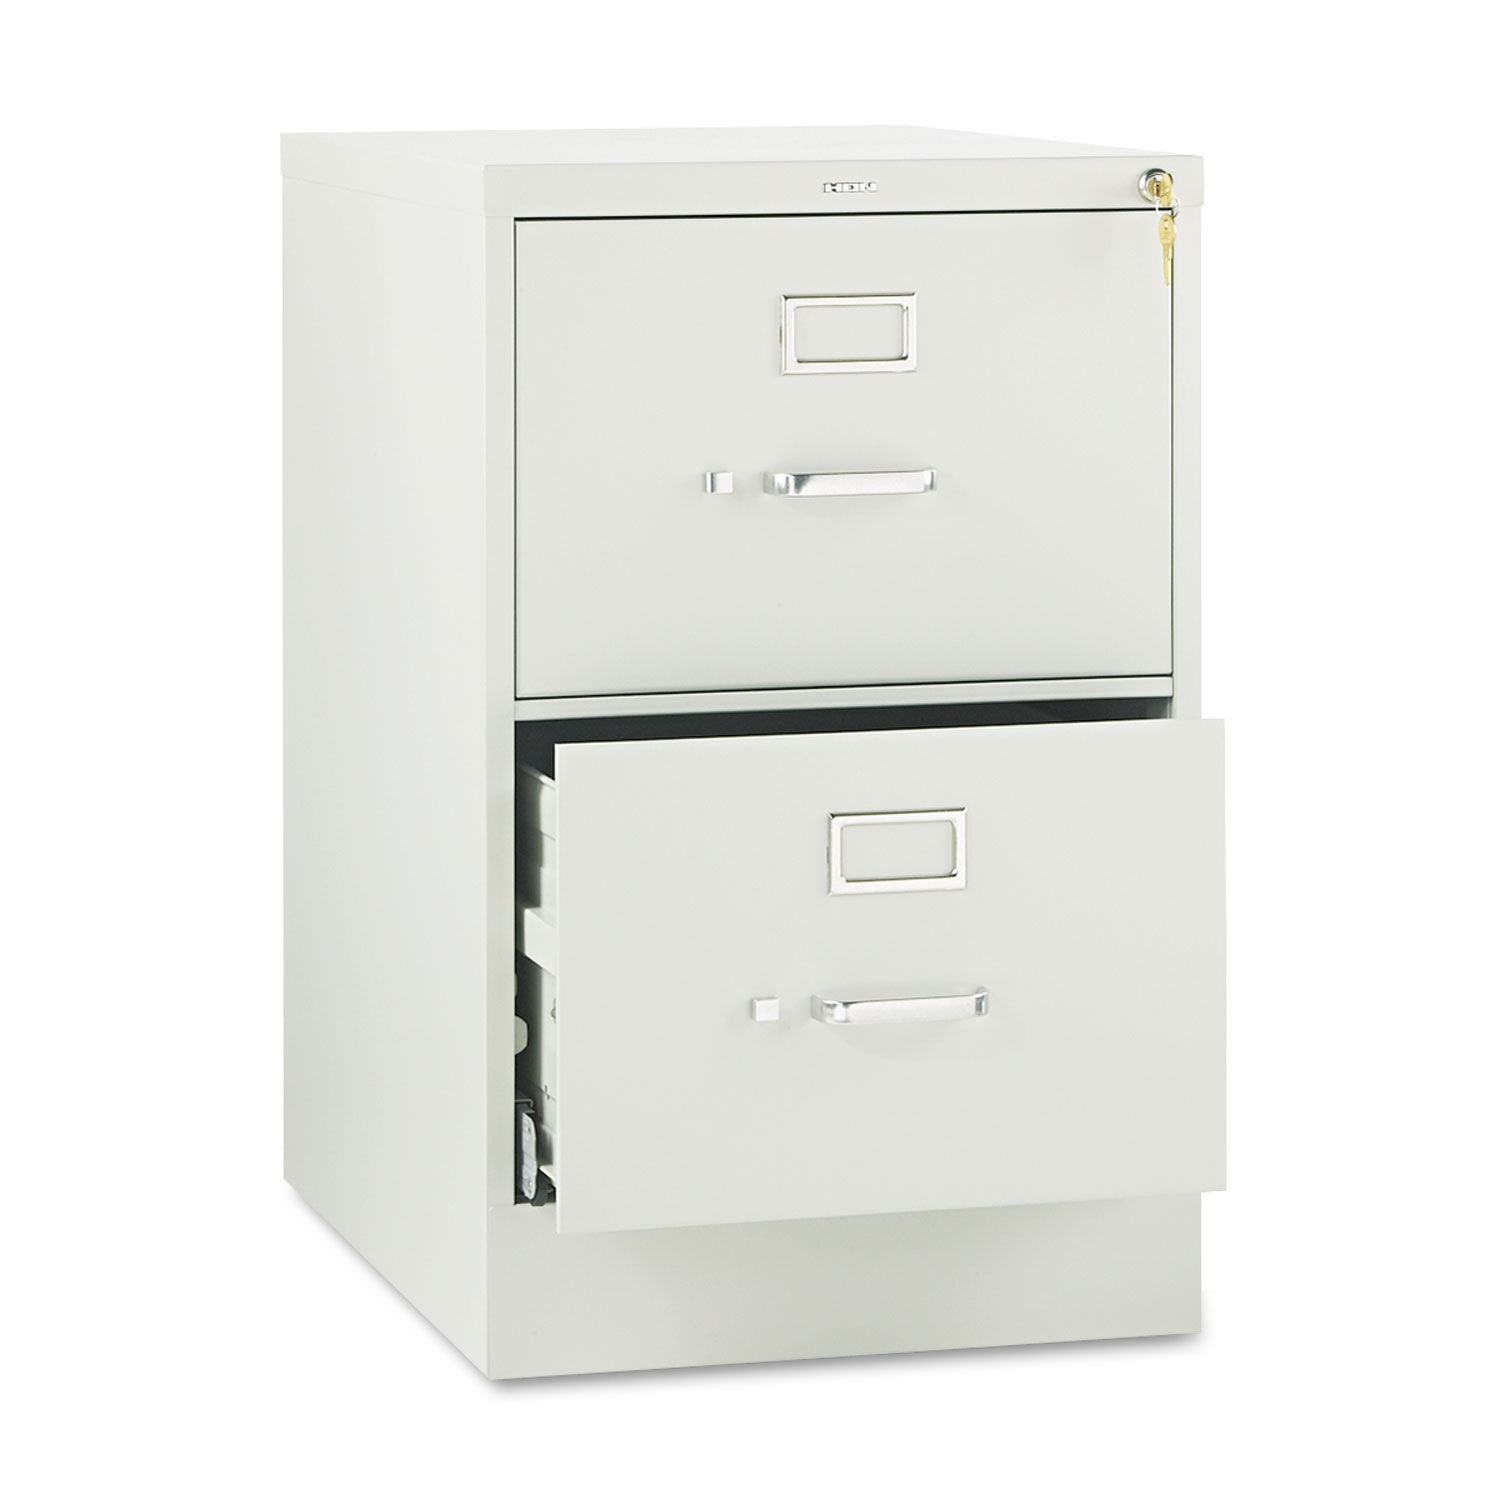 510 Series Vertical File 2 Legal-Size File Drawers, Light Gray, 18.25" x 25" x 29"